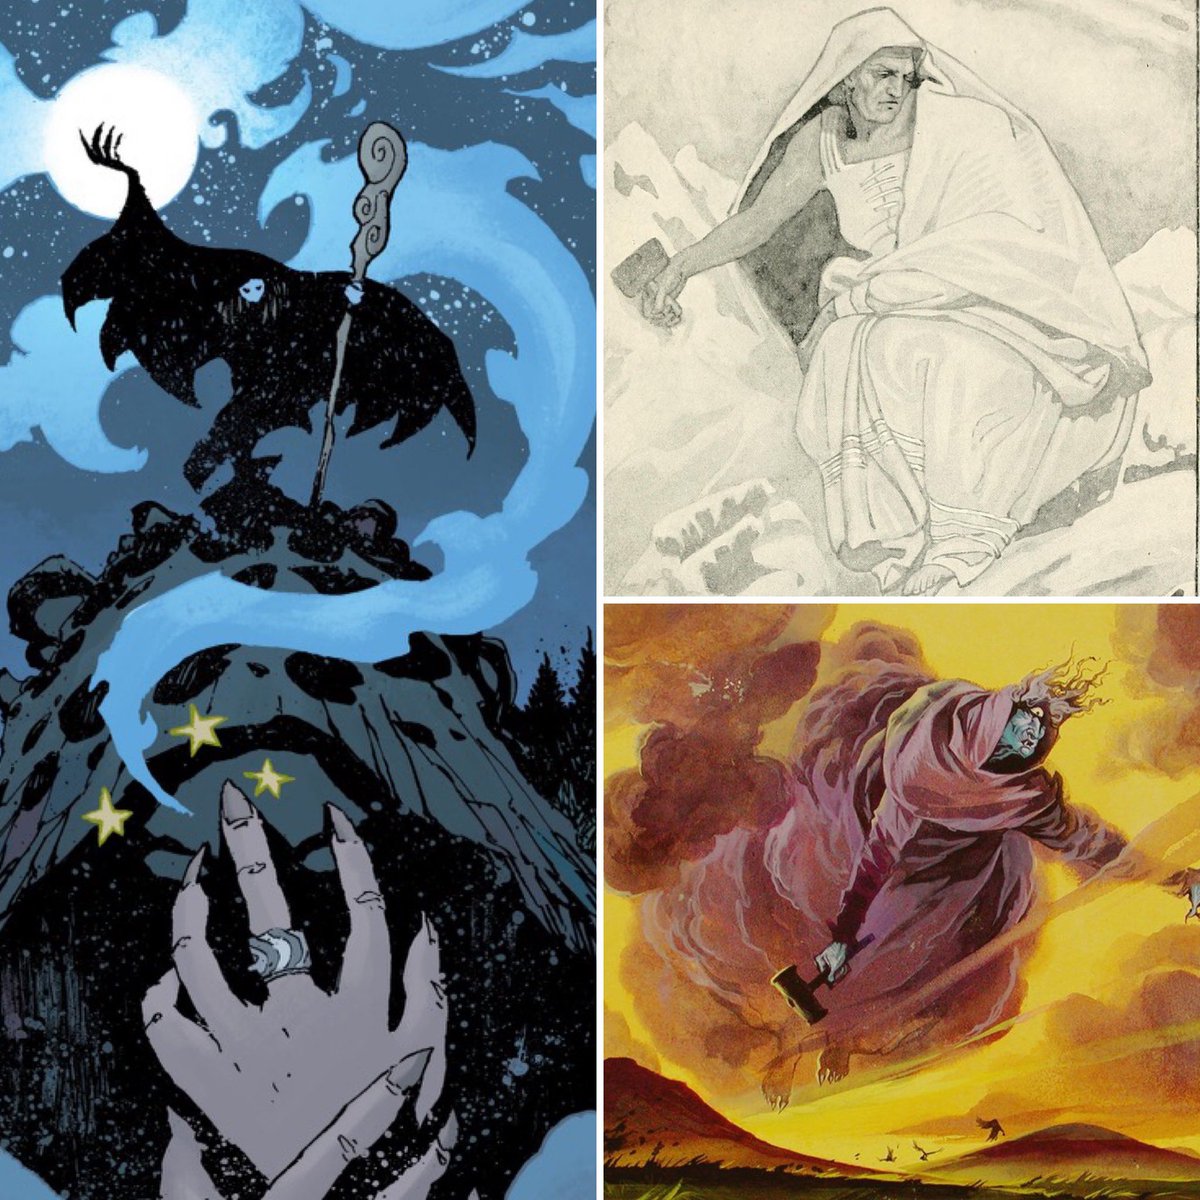 The Celtic Goddess, Cailleach bheur, is referenced in this story. We discuss “The Great Blizzard,” on this week’s podcast! LINK IN BIO! #hellboybookclub #podcast #hellboy #mikemignola #christophermitten #witchfinder #callieach